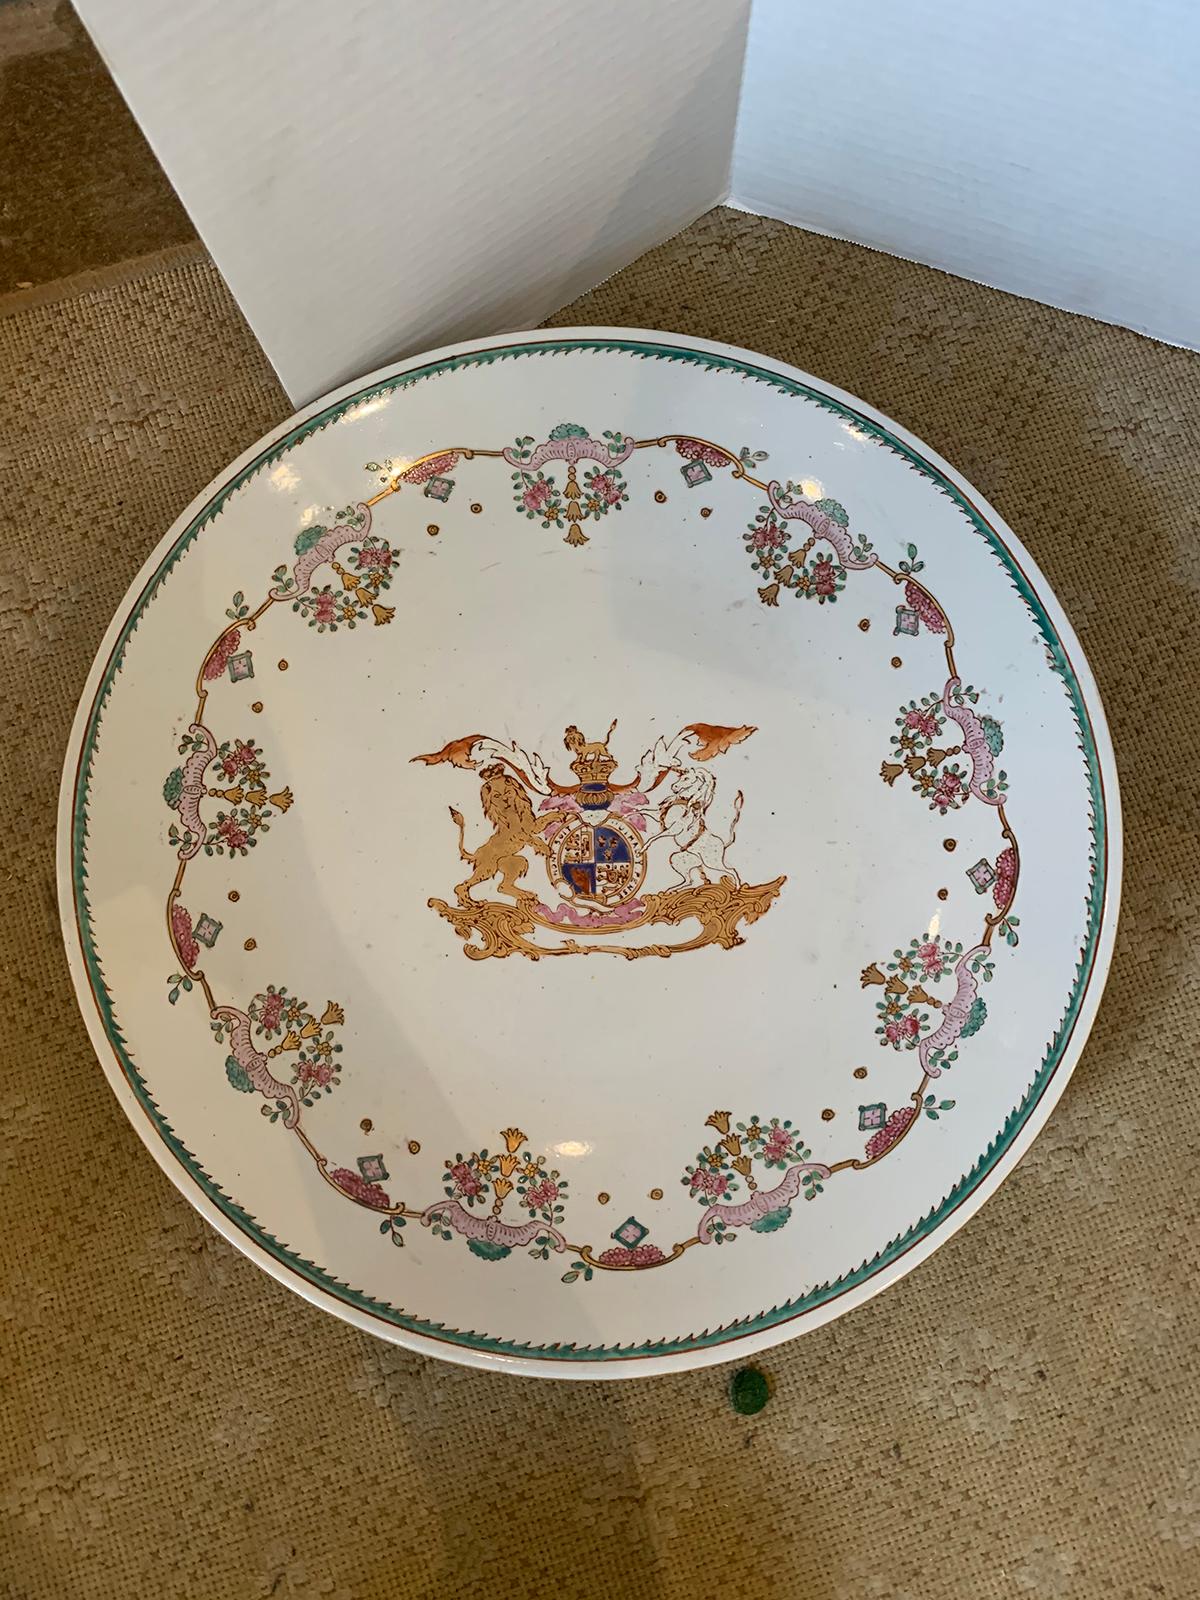 Large 19th century English armorial porcelain charger with crest of Royal coat of arms and order of the garter motto 